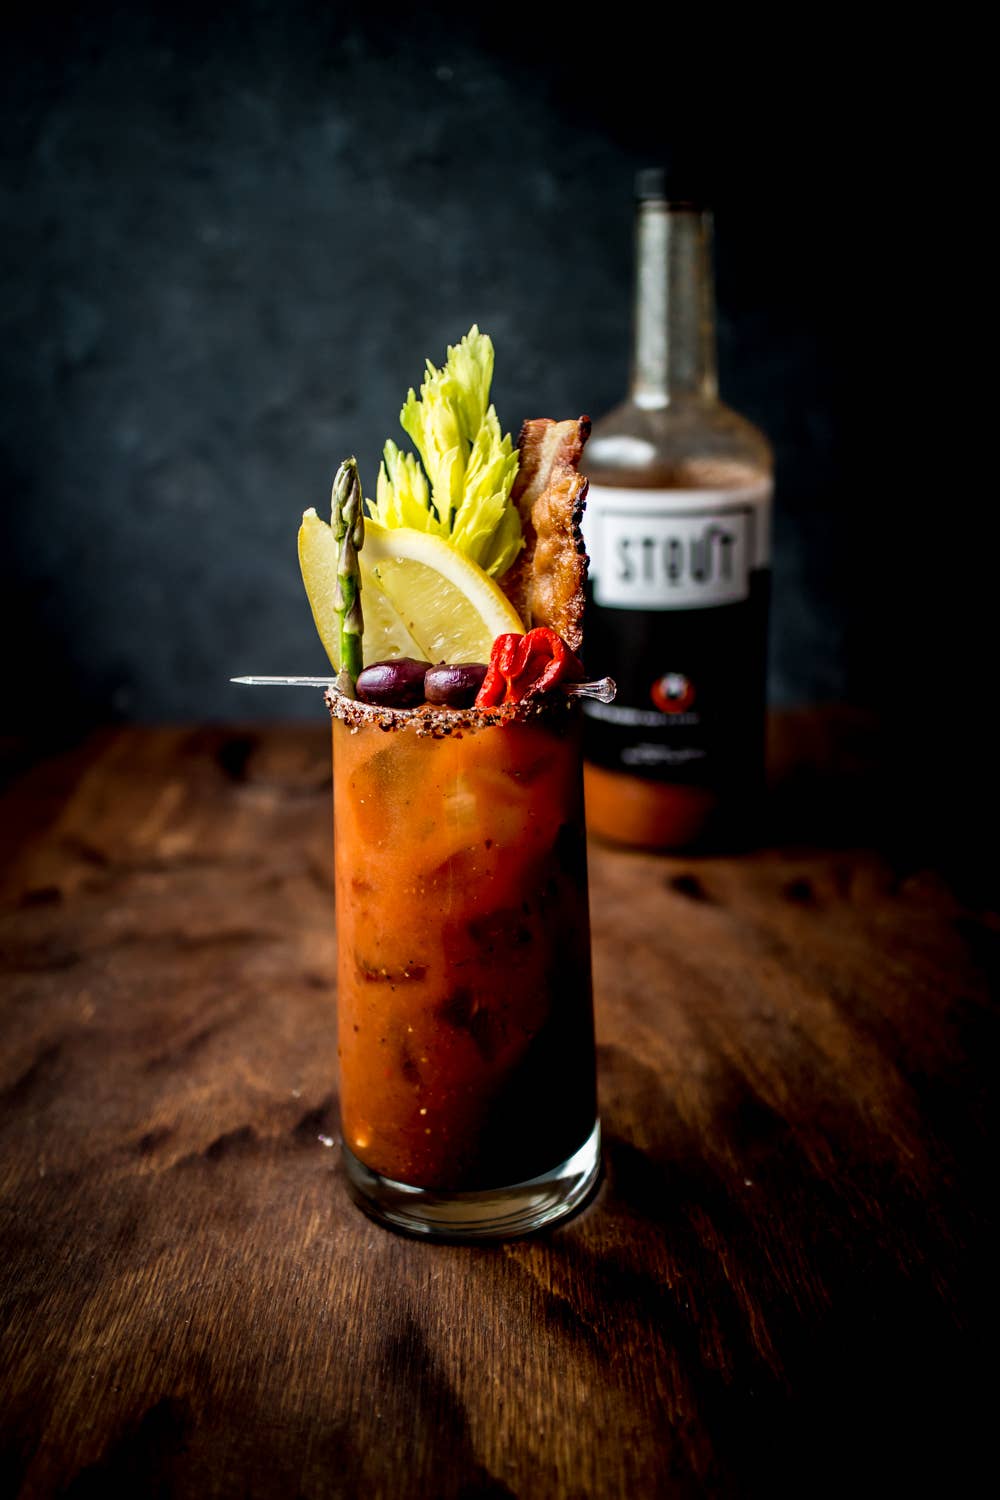 Stout Bloody Mary Blend